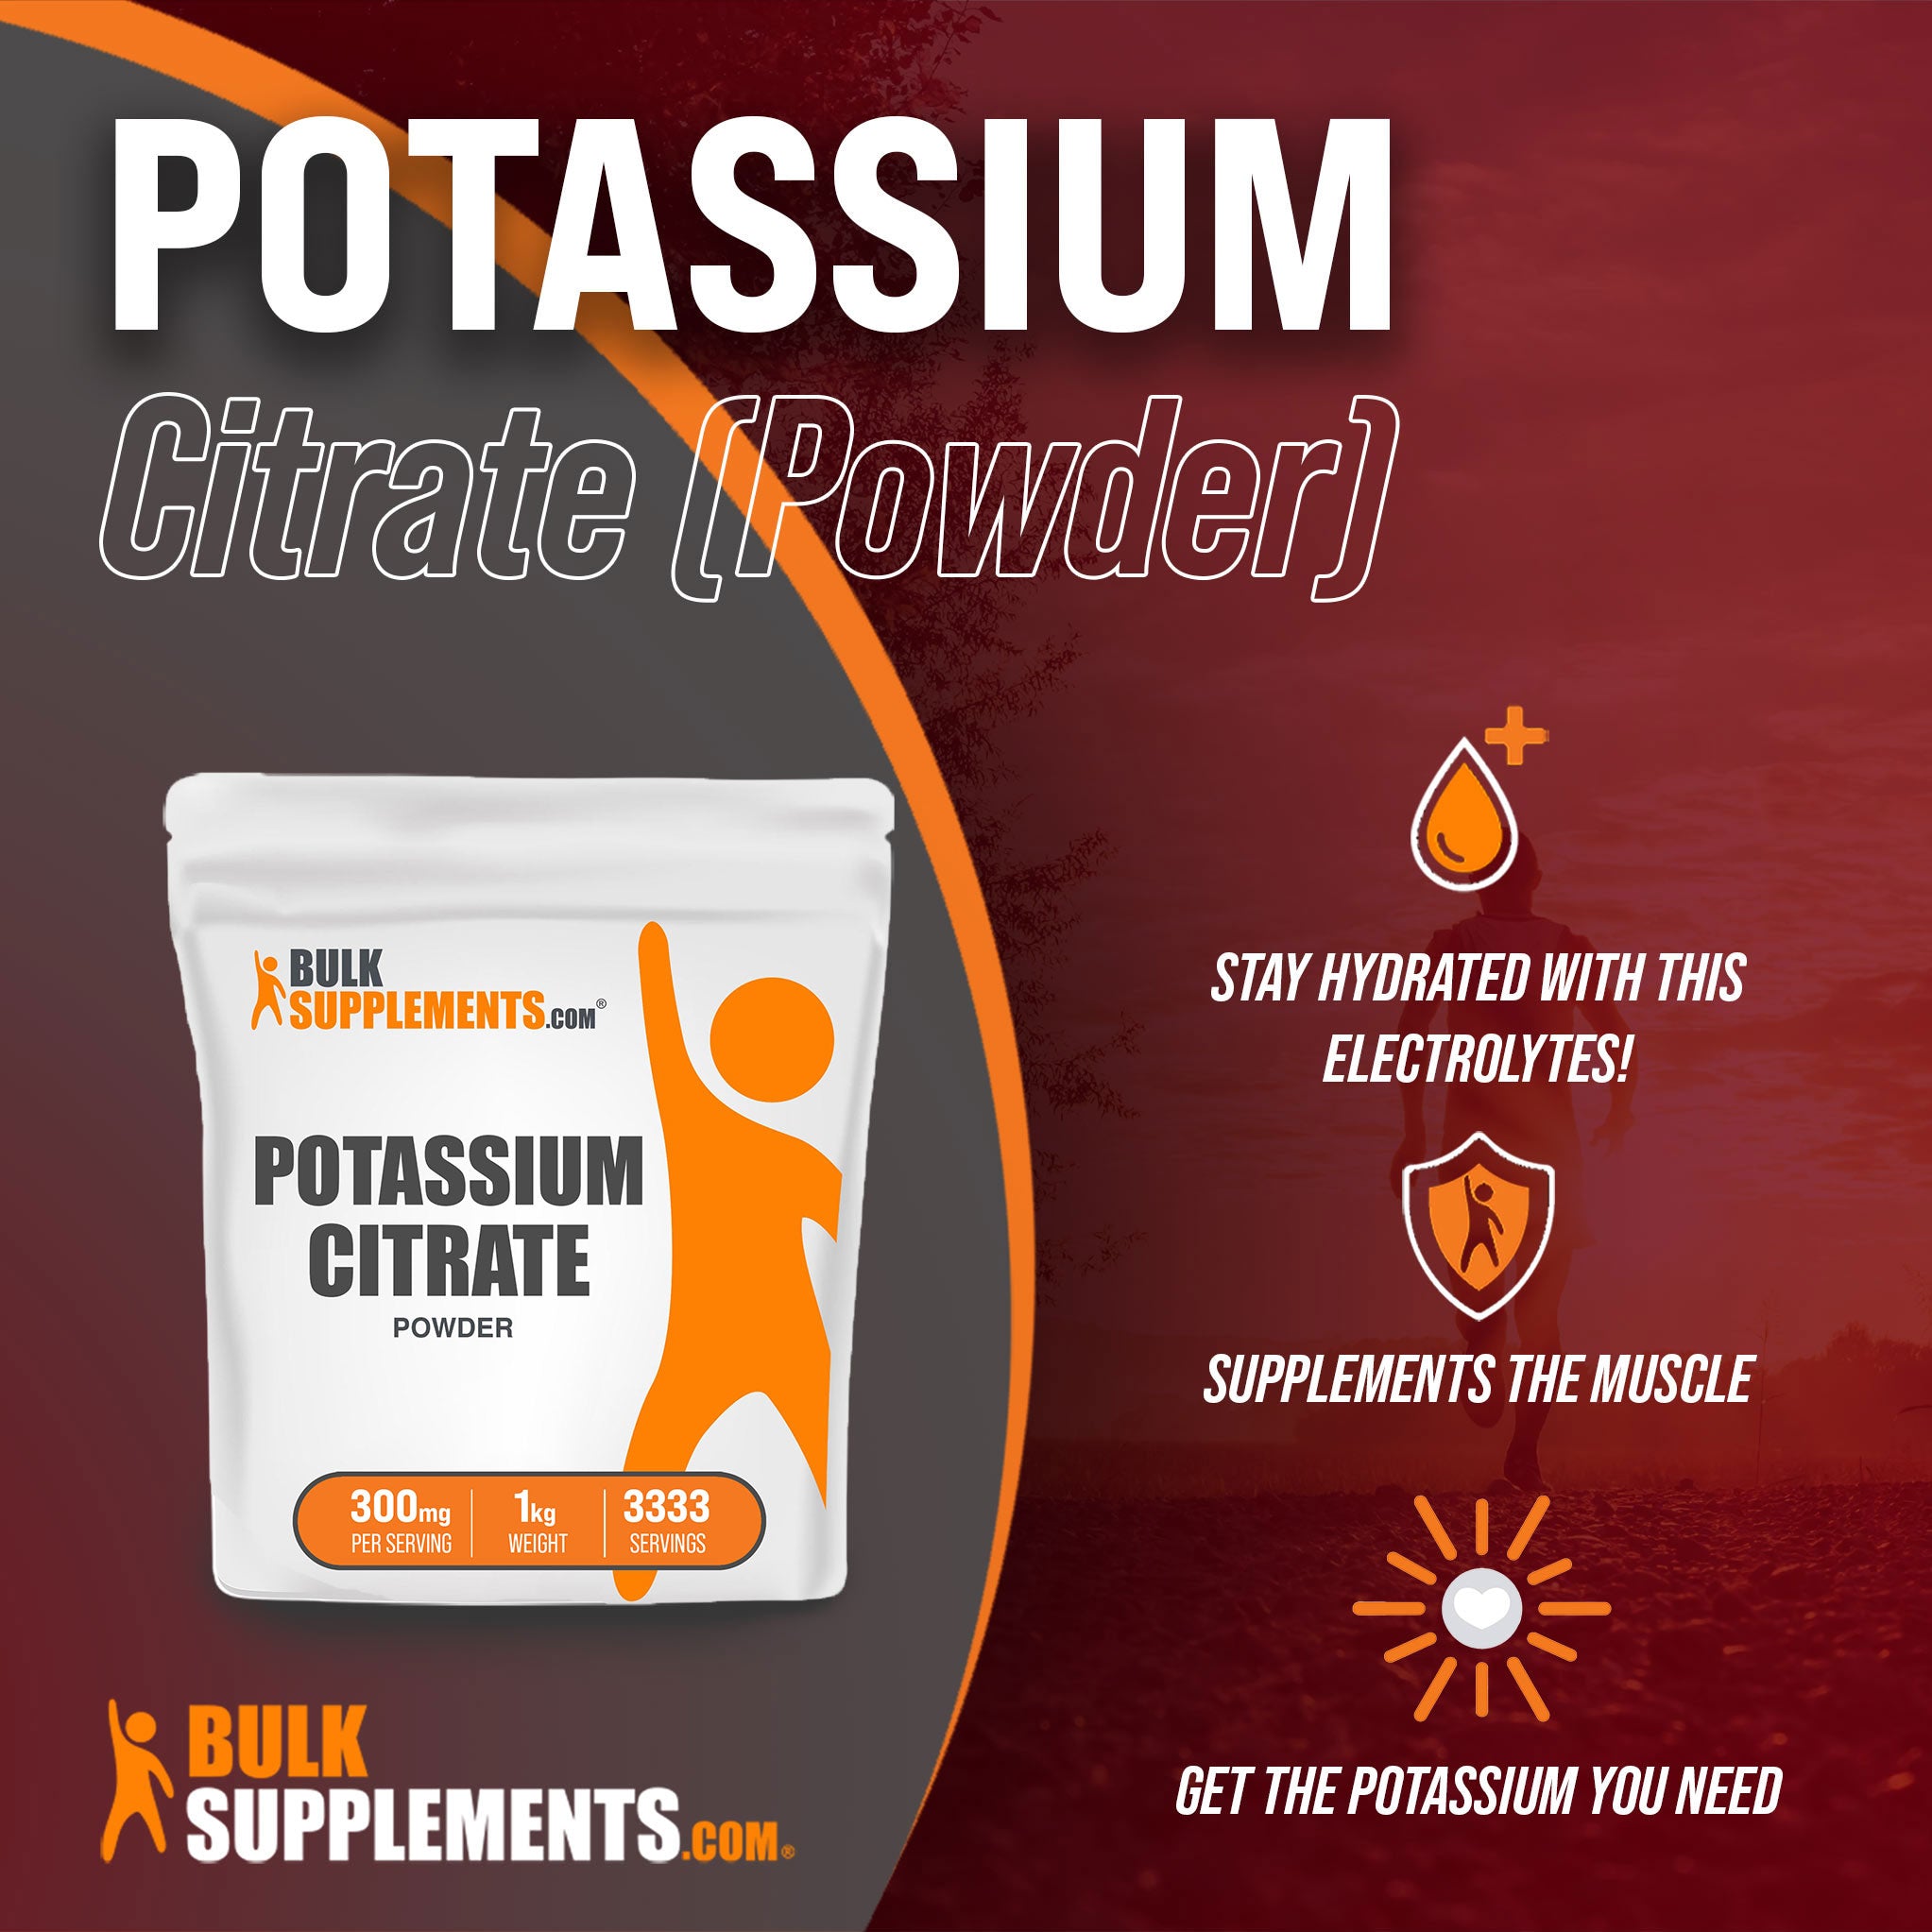 Benefits of Potassium Citrate: stay hydrated with this electrolytes! supplements the muscle, get the potassium you need